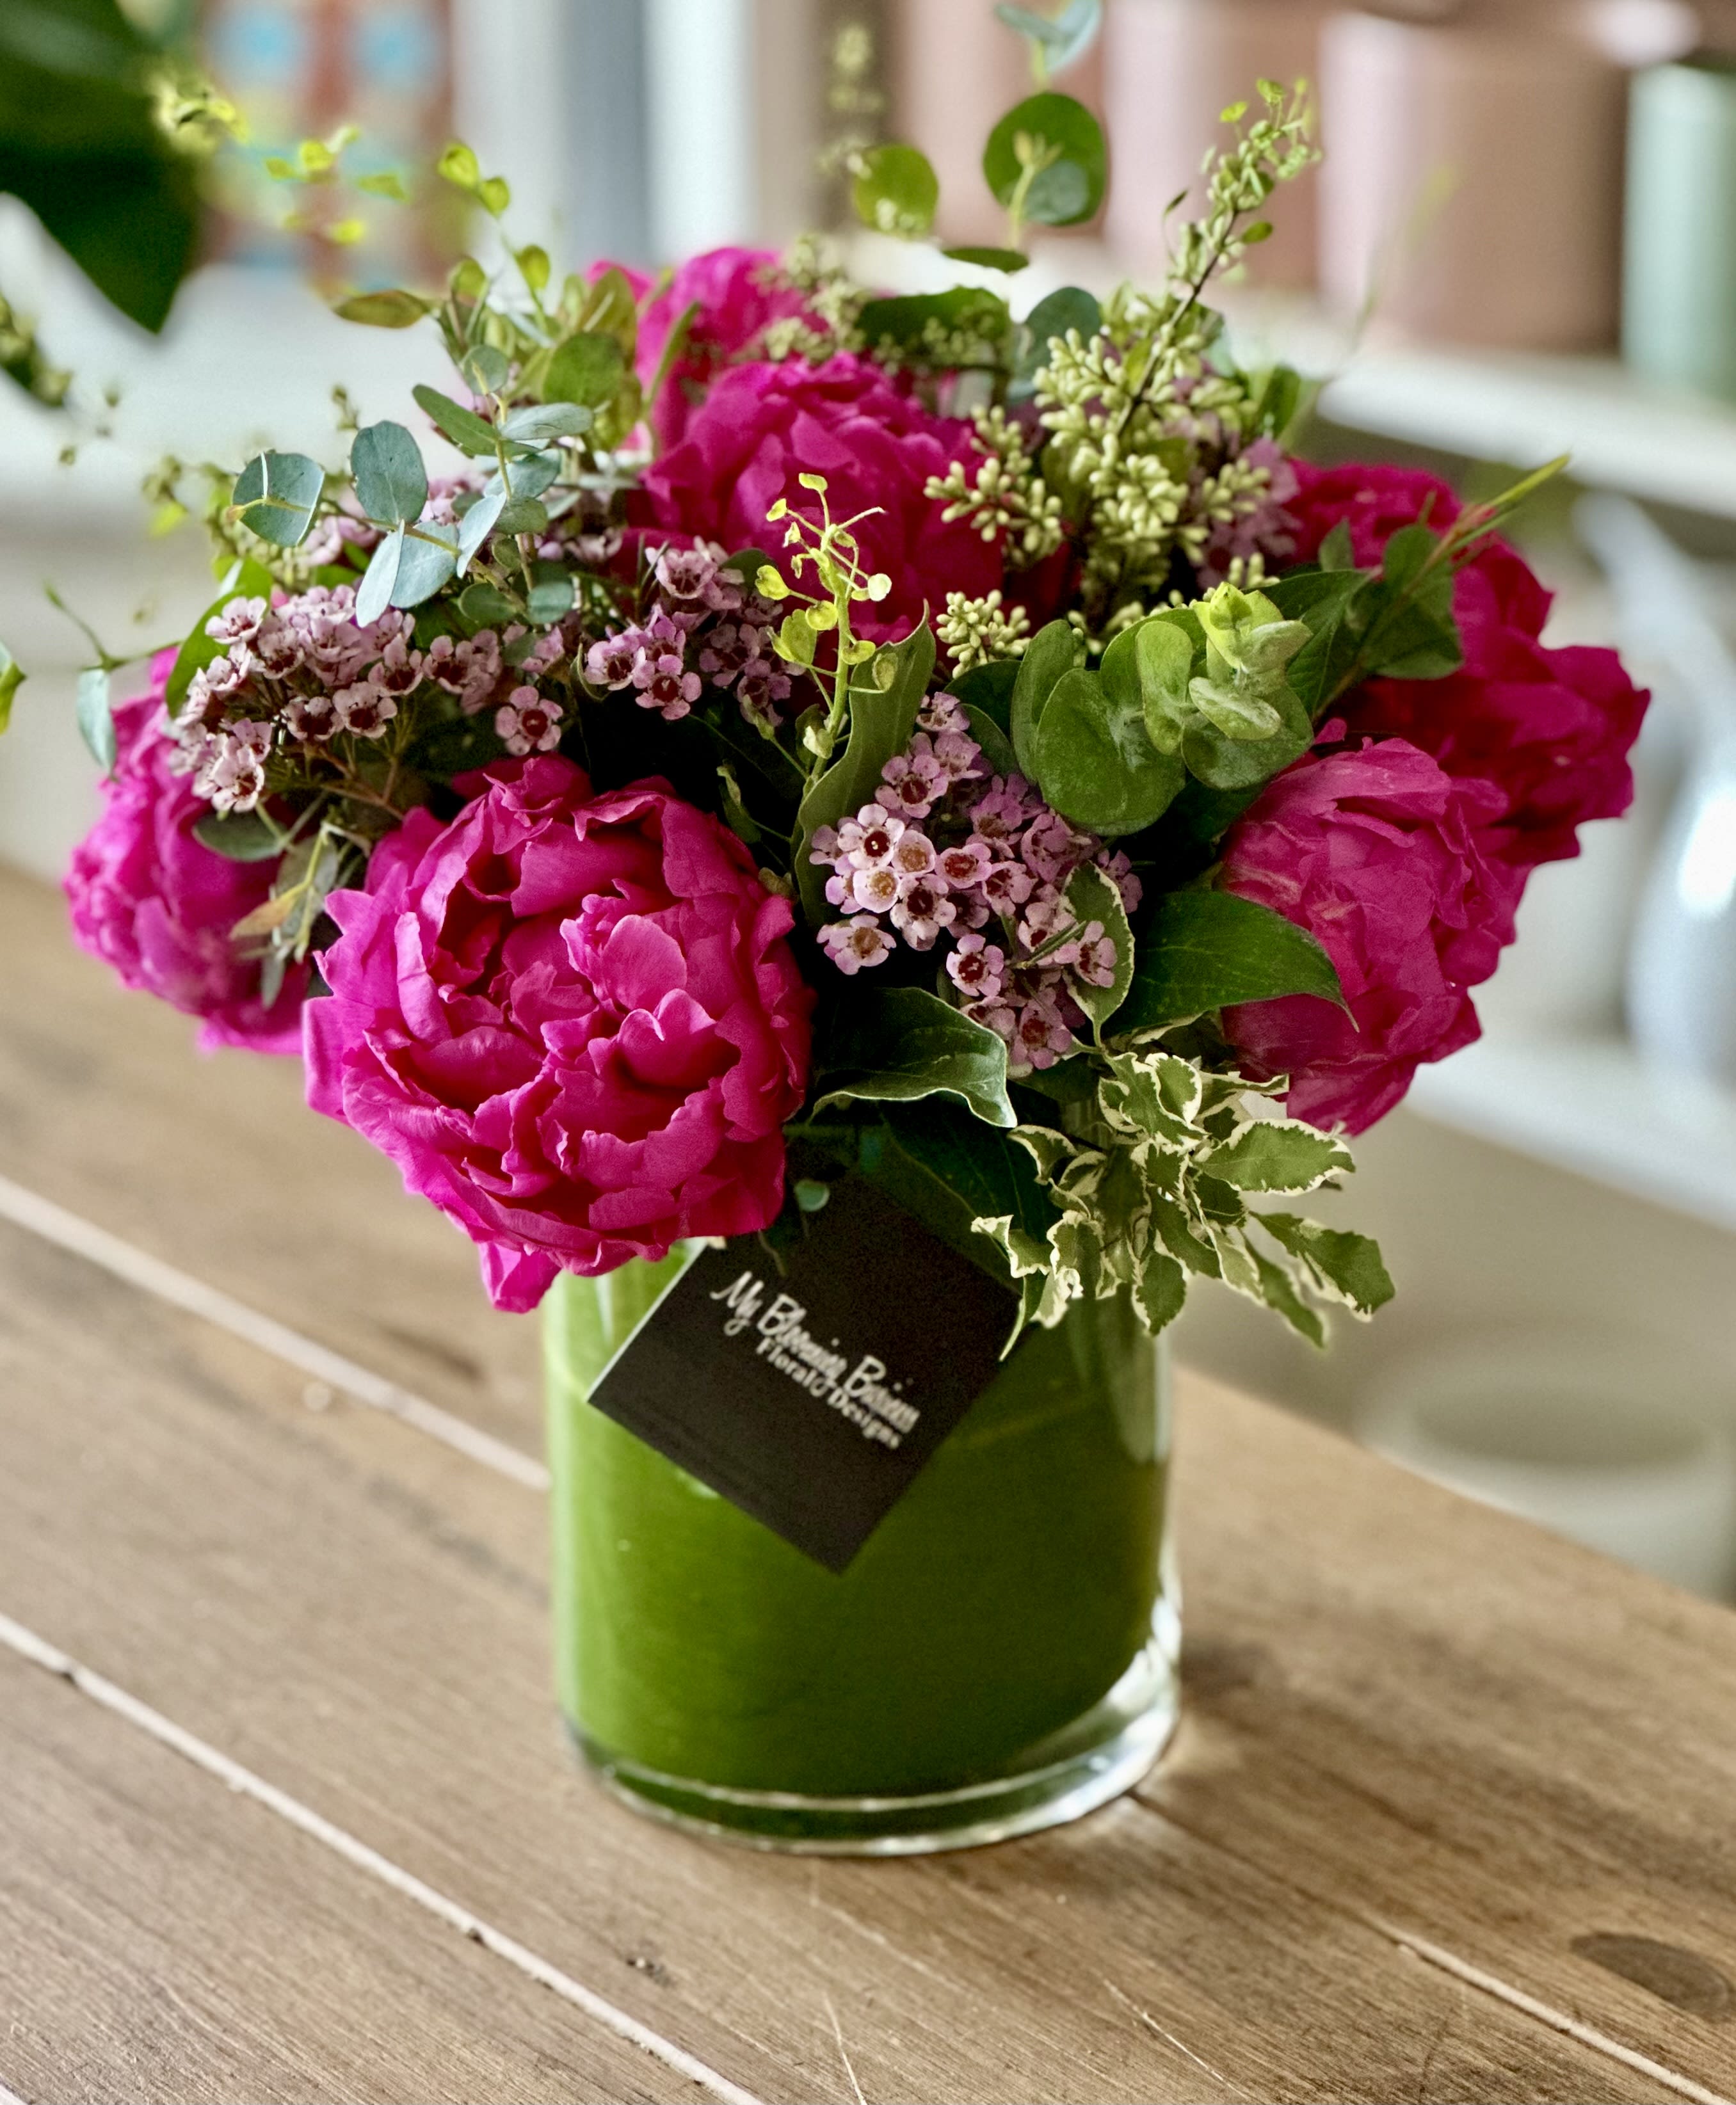 Peonies Please!  - Peonies Please! This beautiful arrangement creates magic in your home with its lush pink peonies and stylishly displayed in a clear cylinder vase. Celebrate the peony season in style and show your blooming personality with this cheerful floral design.   